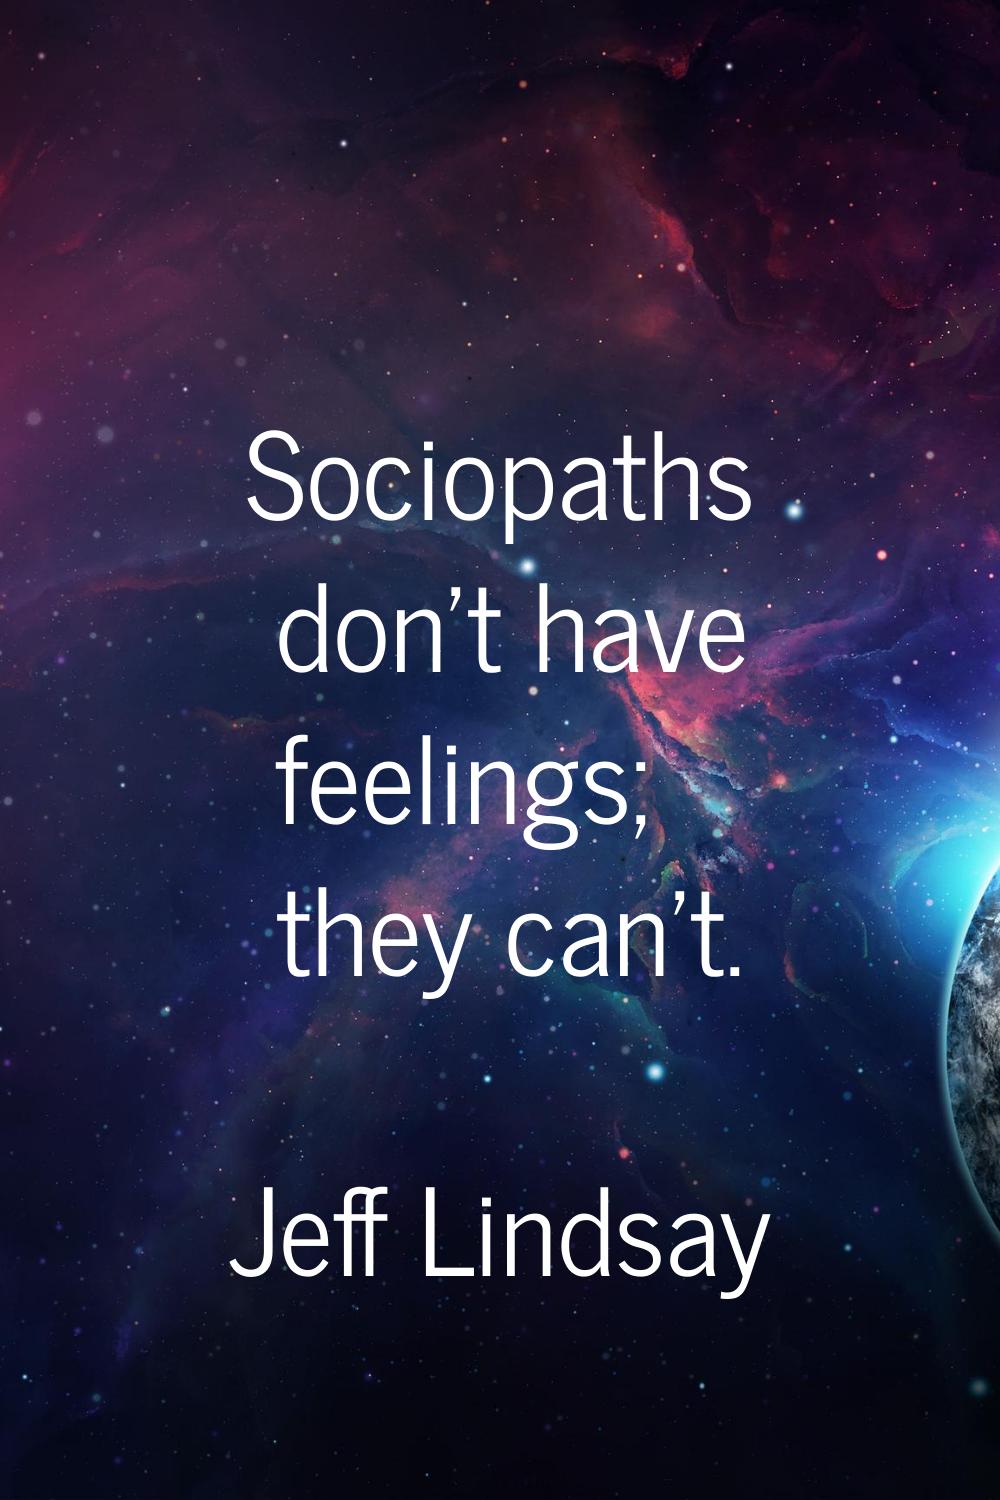 Sociopaths don't have feelings; they can't.